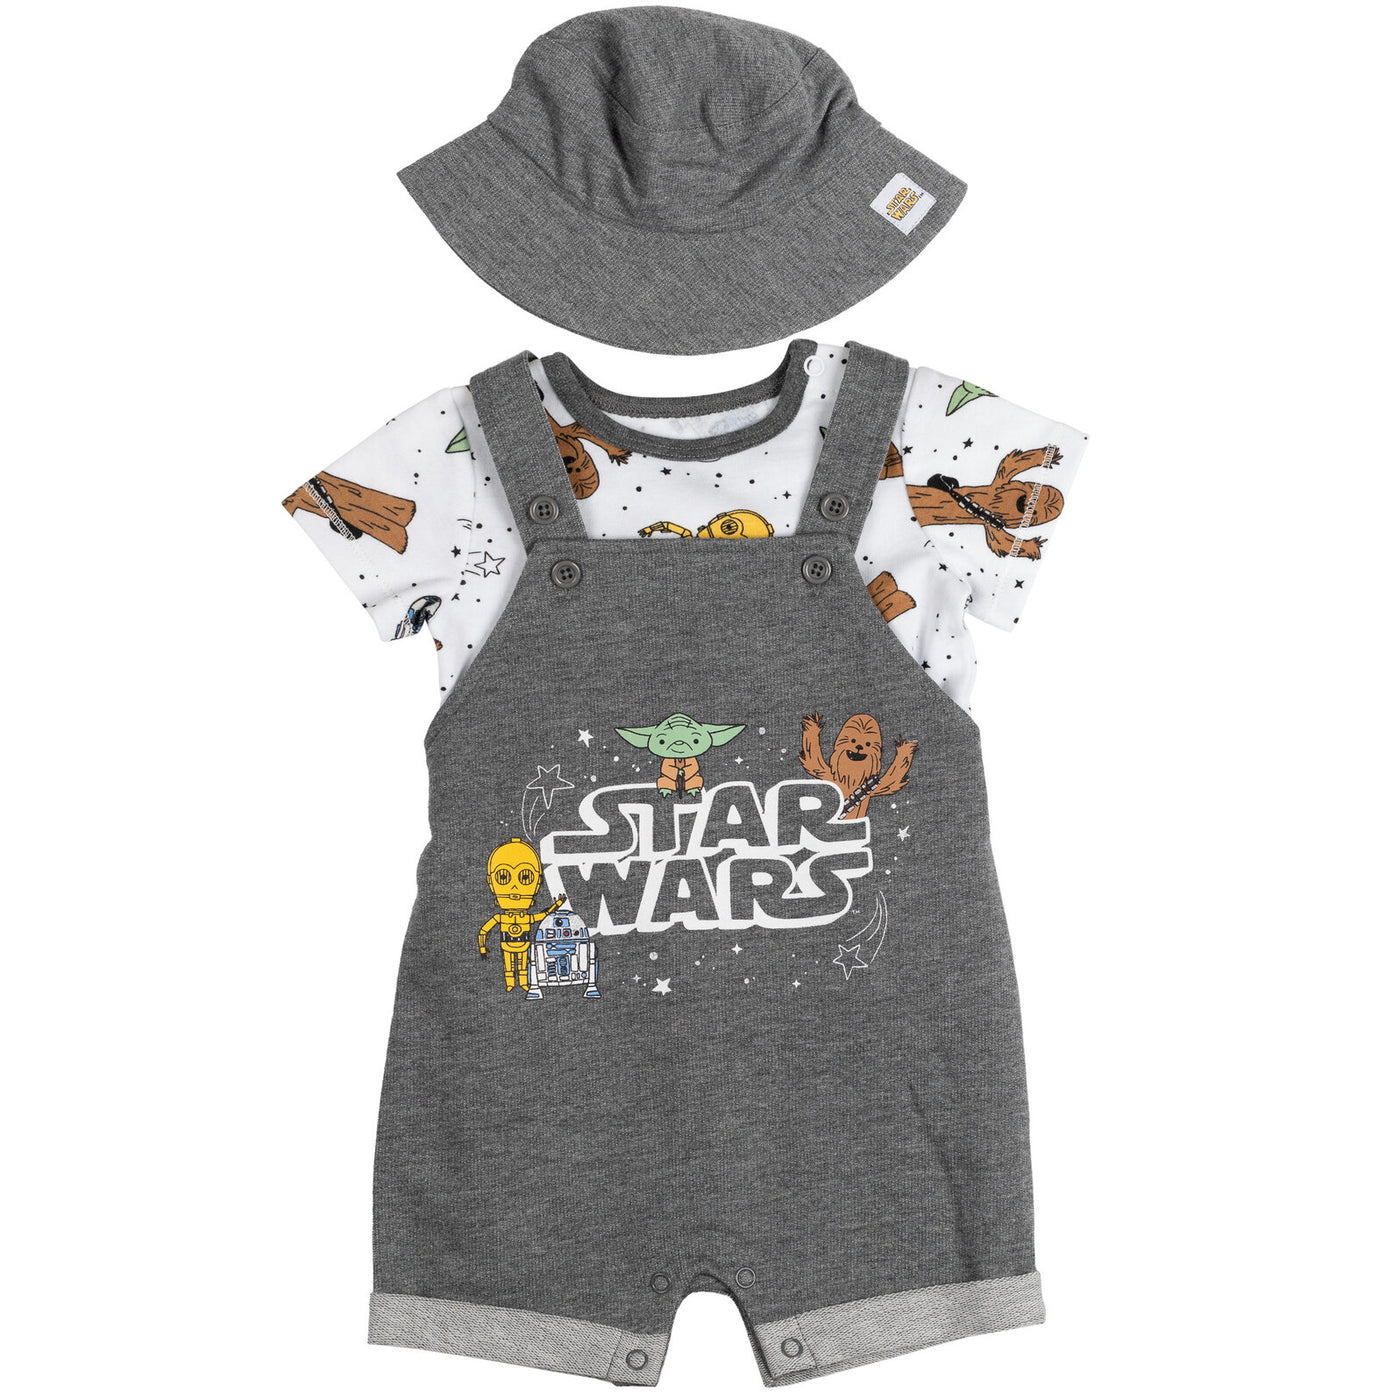 STAR WARS French Terry Short Overalls T-Shirt and Bucket Sun Hat 3 Piece Outfit Set